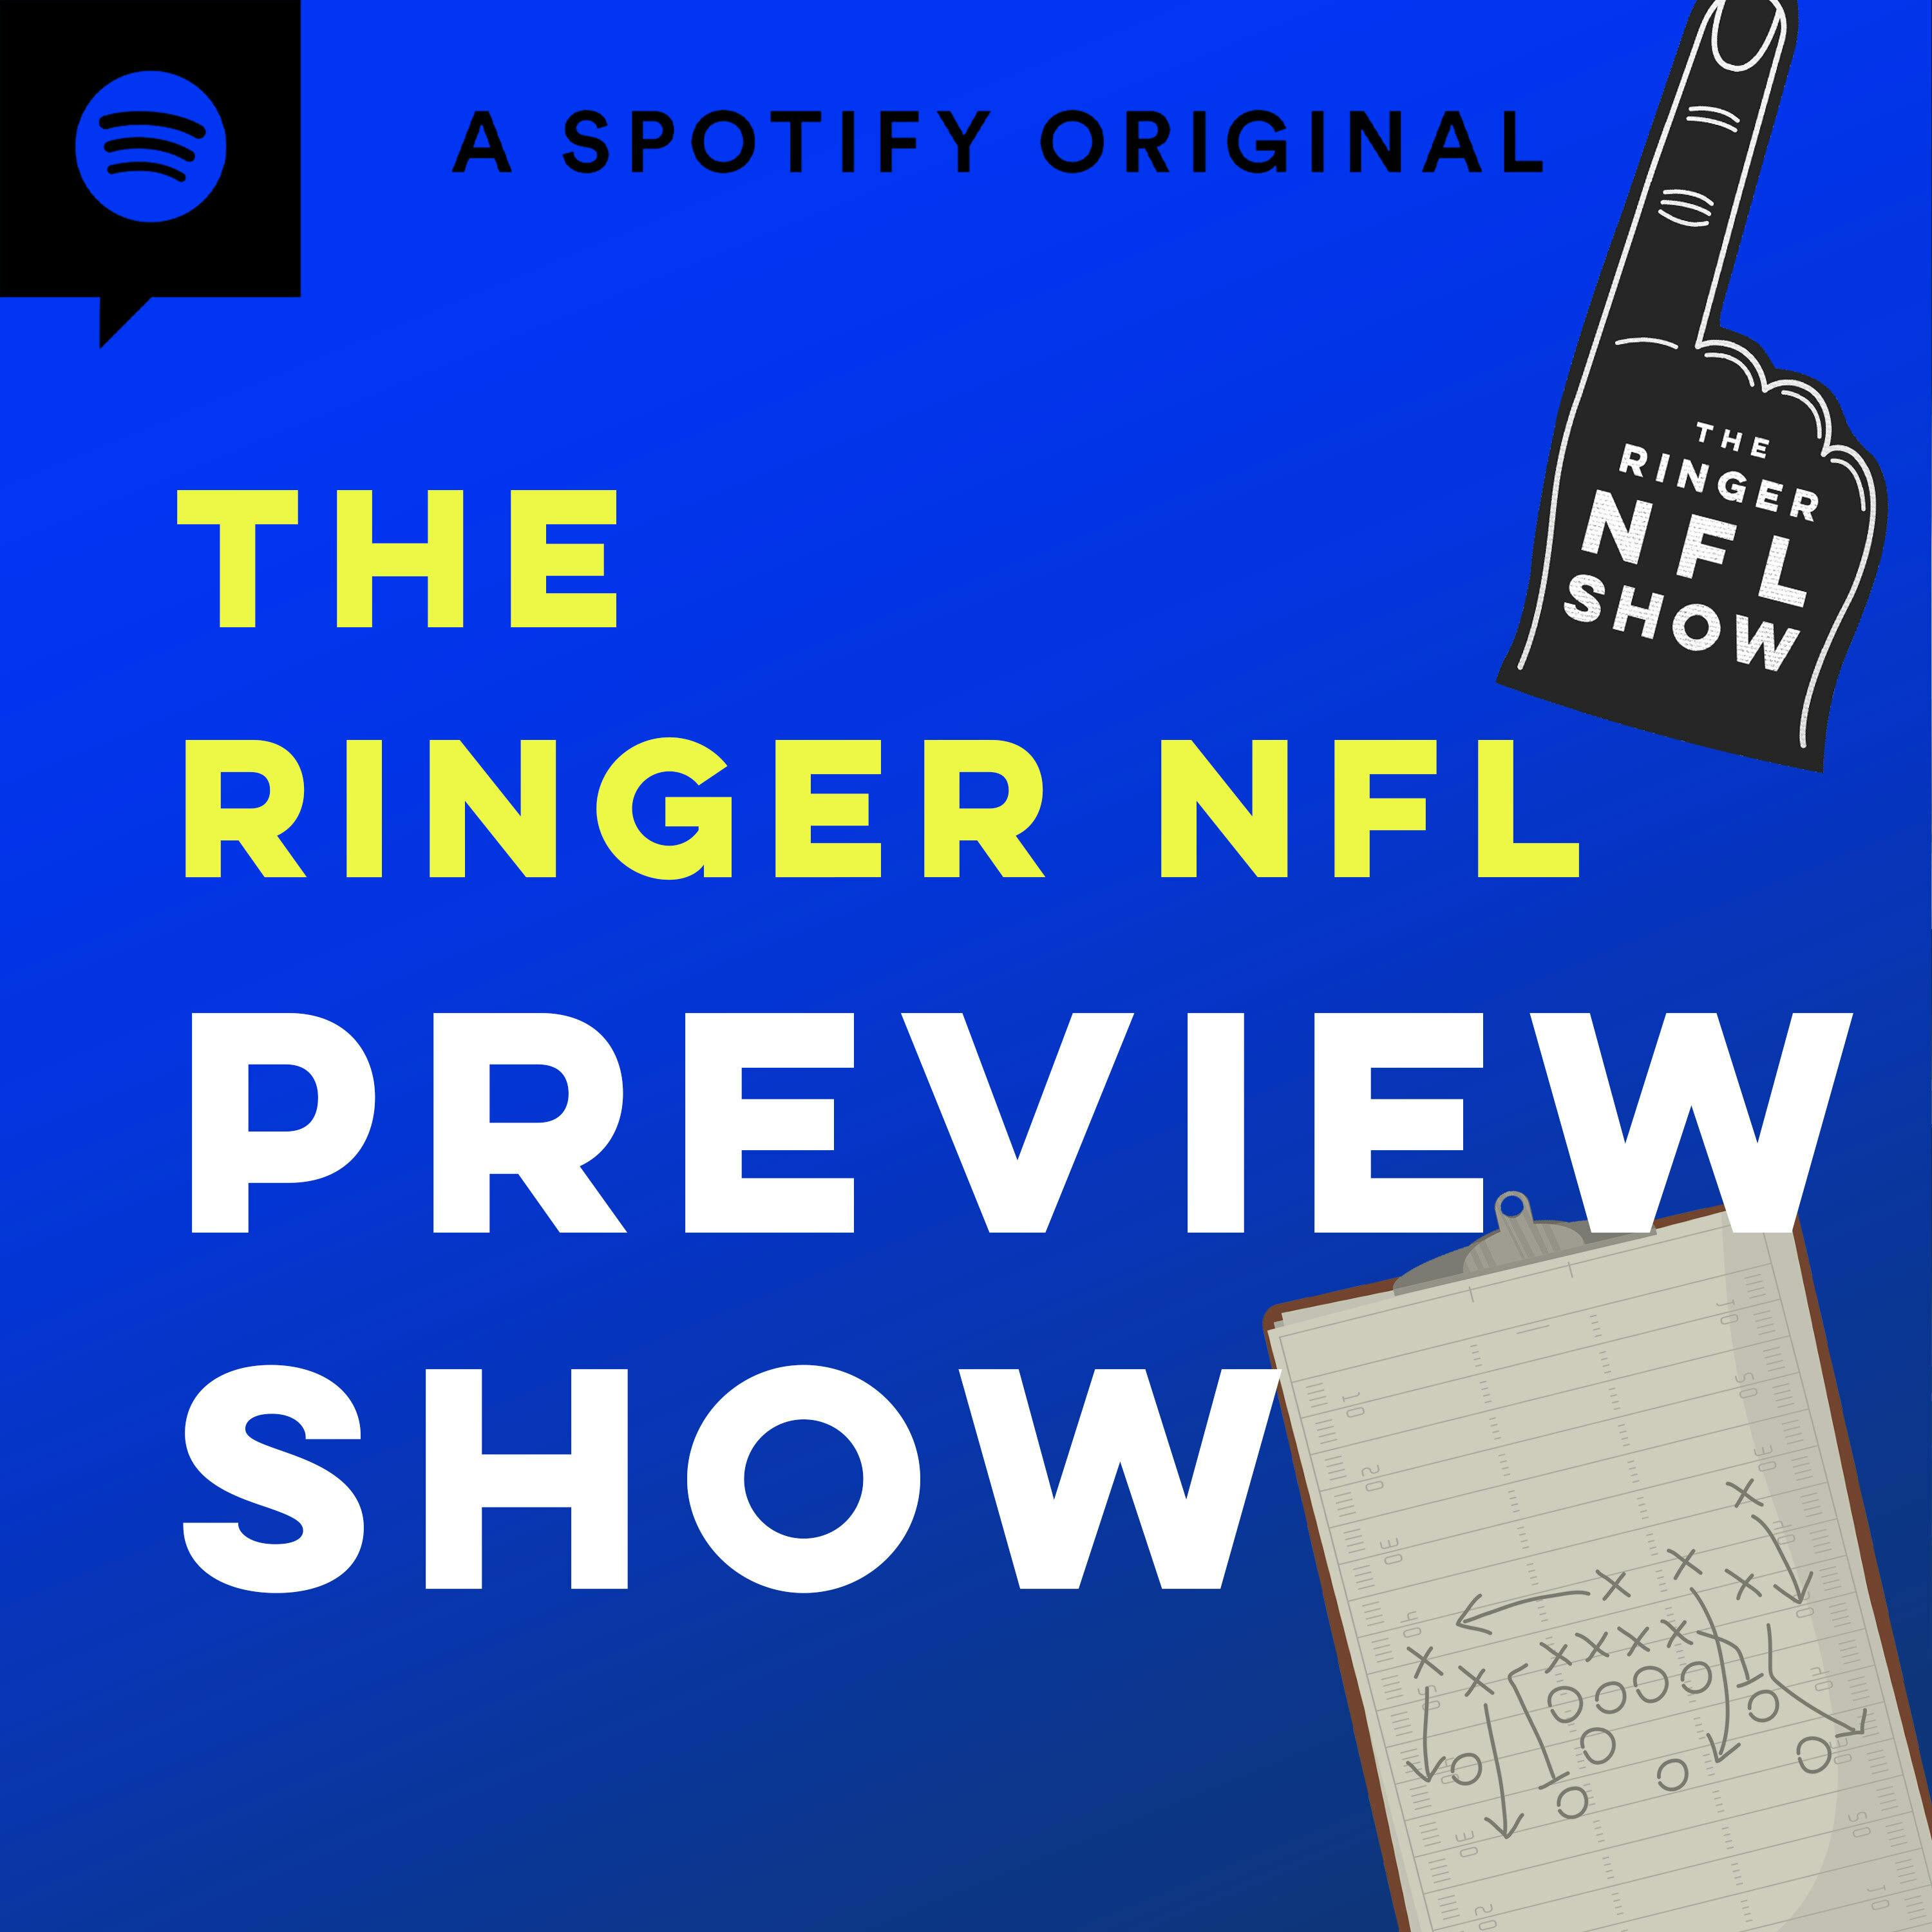 Week 11 Preview: Vikings-Cowboys, Chargers-Chiefs, Jets-Pats | The Ringer NFL Preview Show